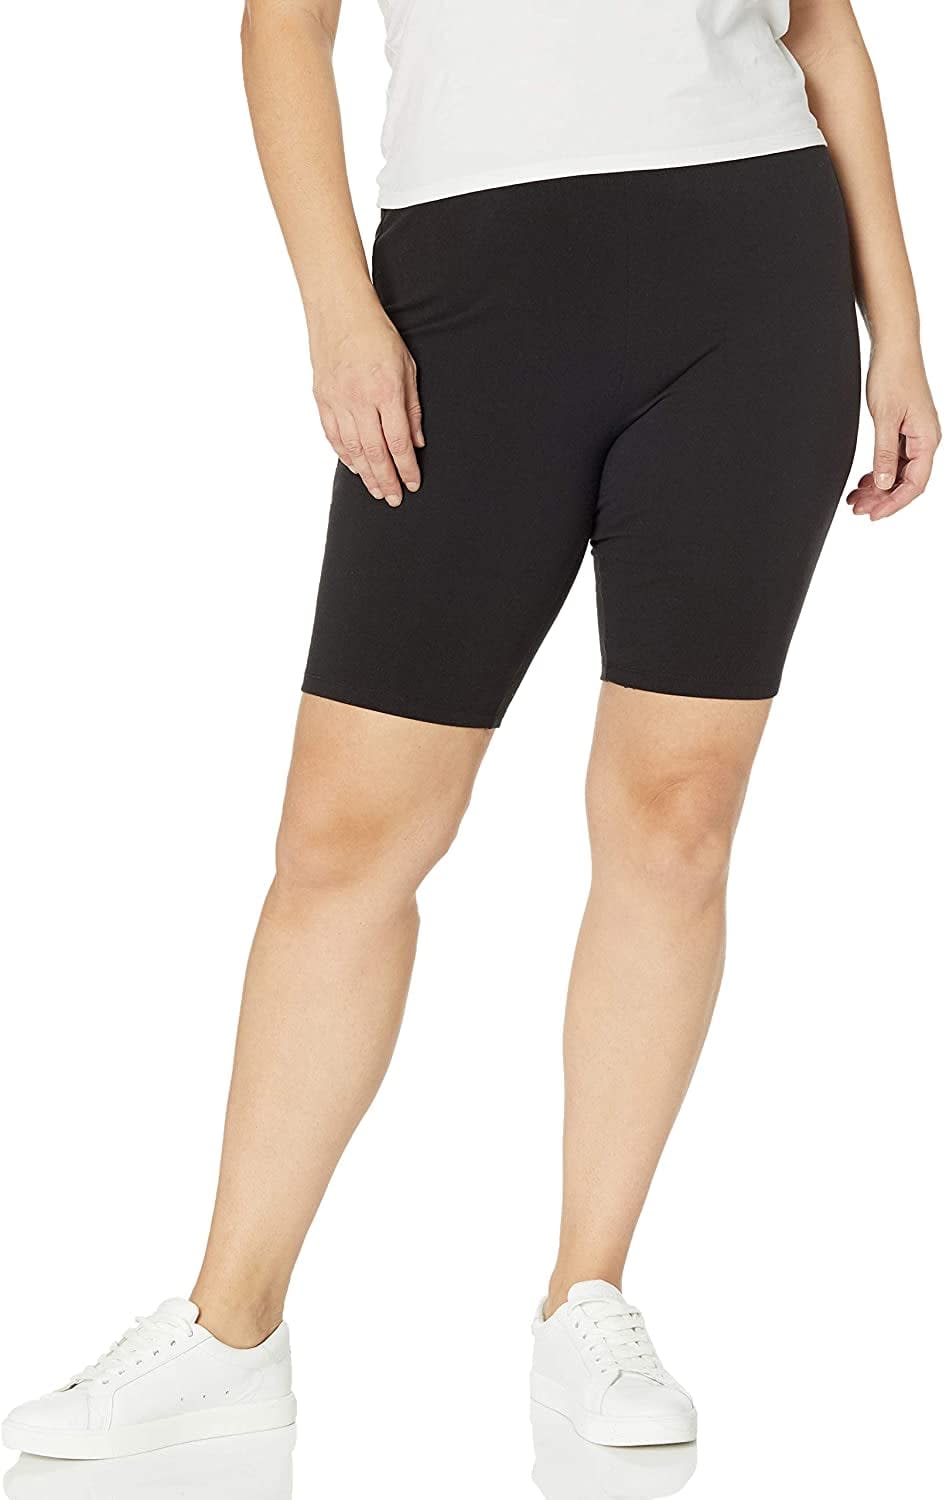 <p>You can't go wrong with these <span>Just My Size Stretch Jersey Bike Shorts</span> ($9, originally $18). If you have curves, these will be your new favorites; they have lots of five star reviews. Customers say to consider sizing down, as they have plenty of stretch. Plus, since they're cotton, these are best for dog walks and light movement. If you're looking for bootcamp bike shorts, these might not be the shorts for you.</p>